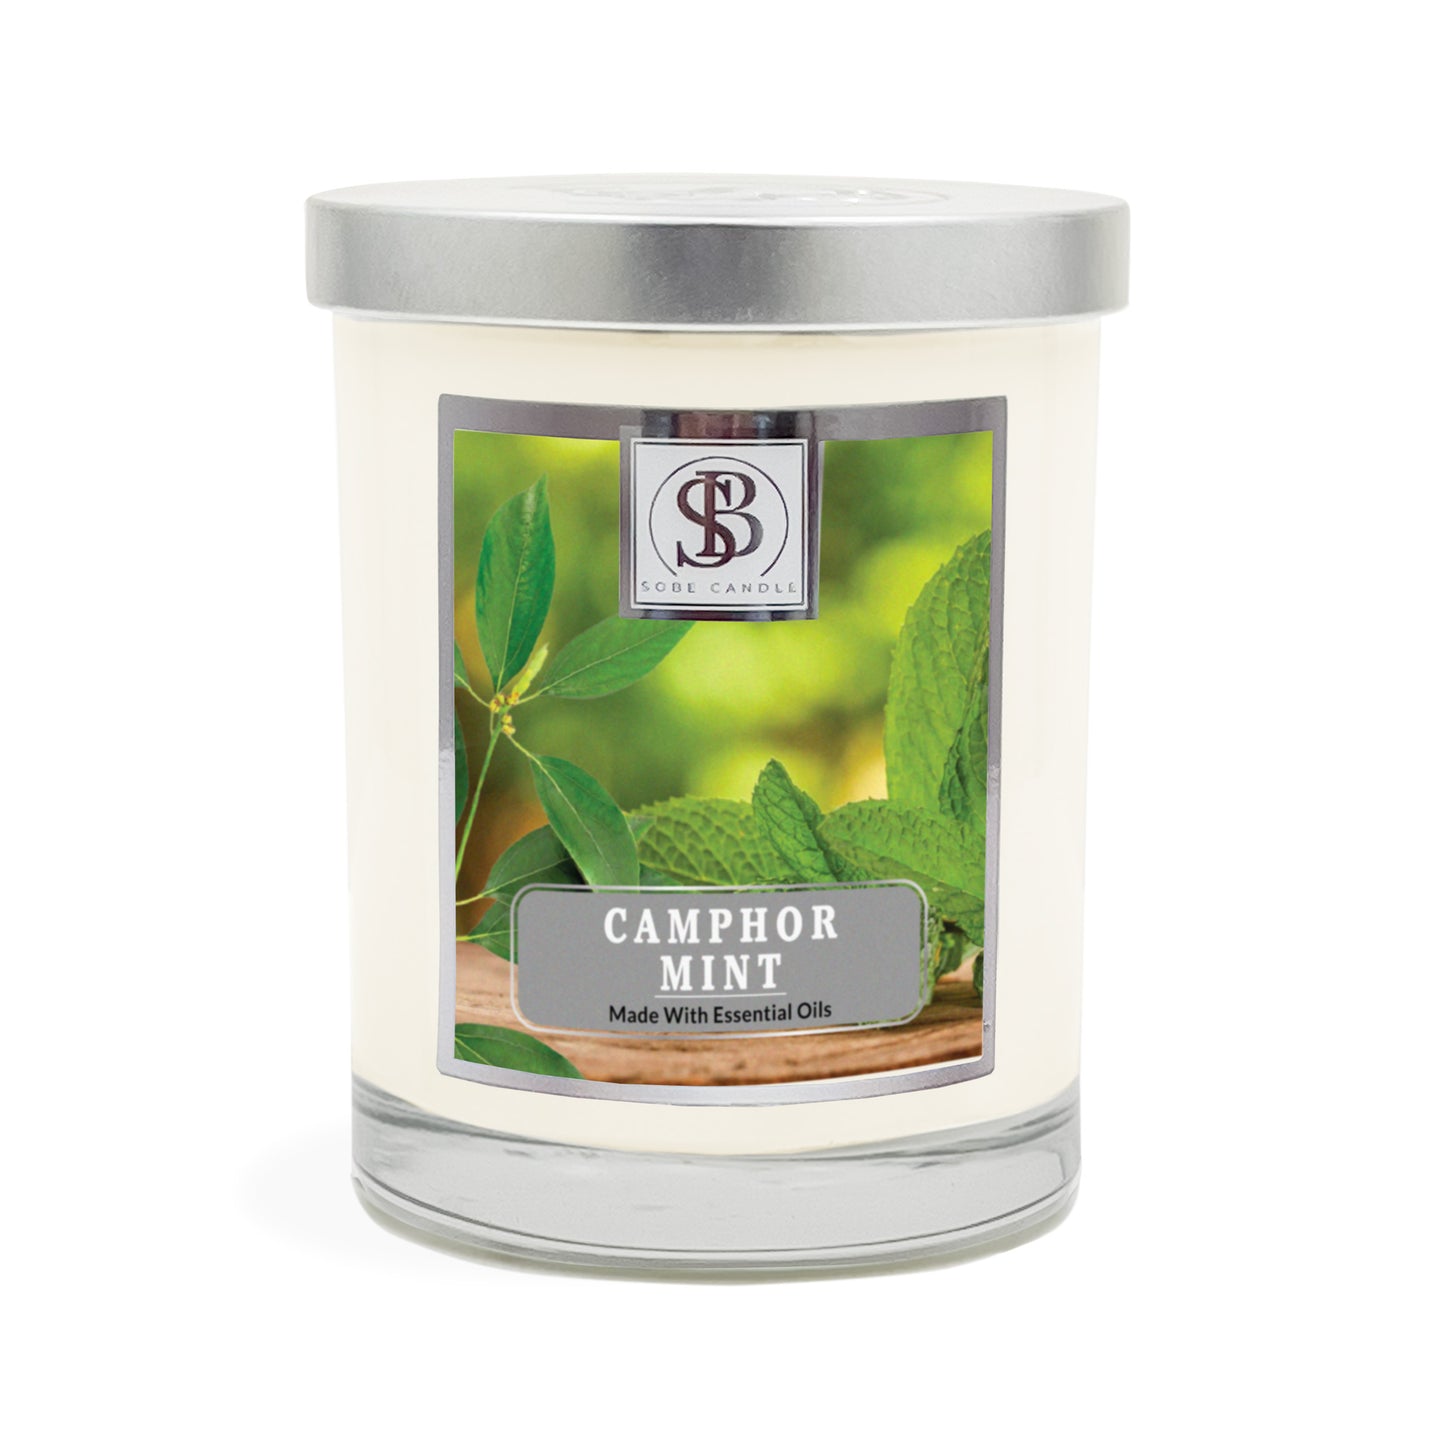 CAMPHOR MINT | Soy Scented Candle 11 oz